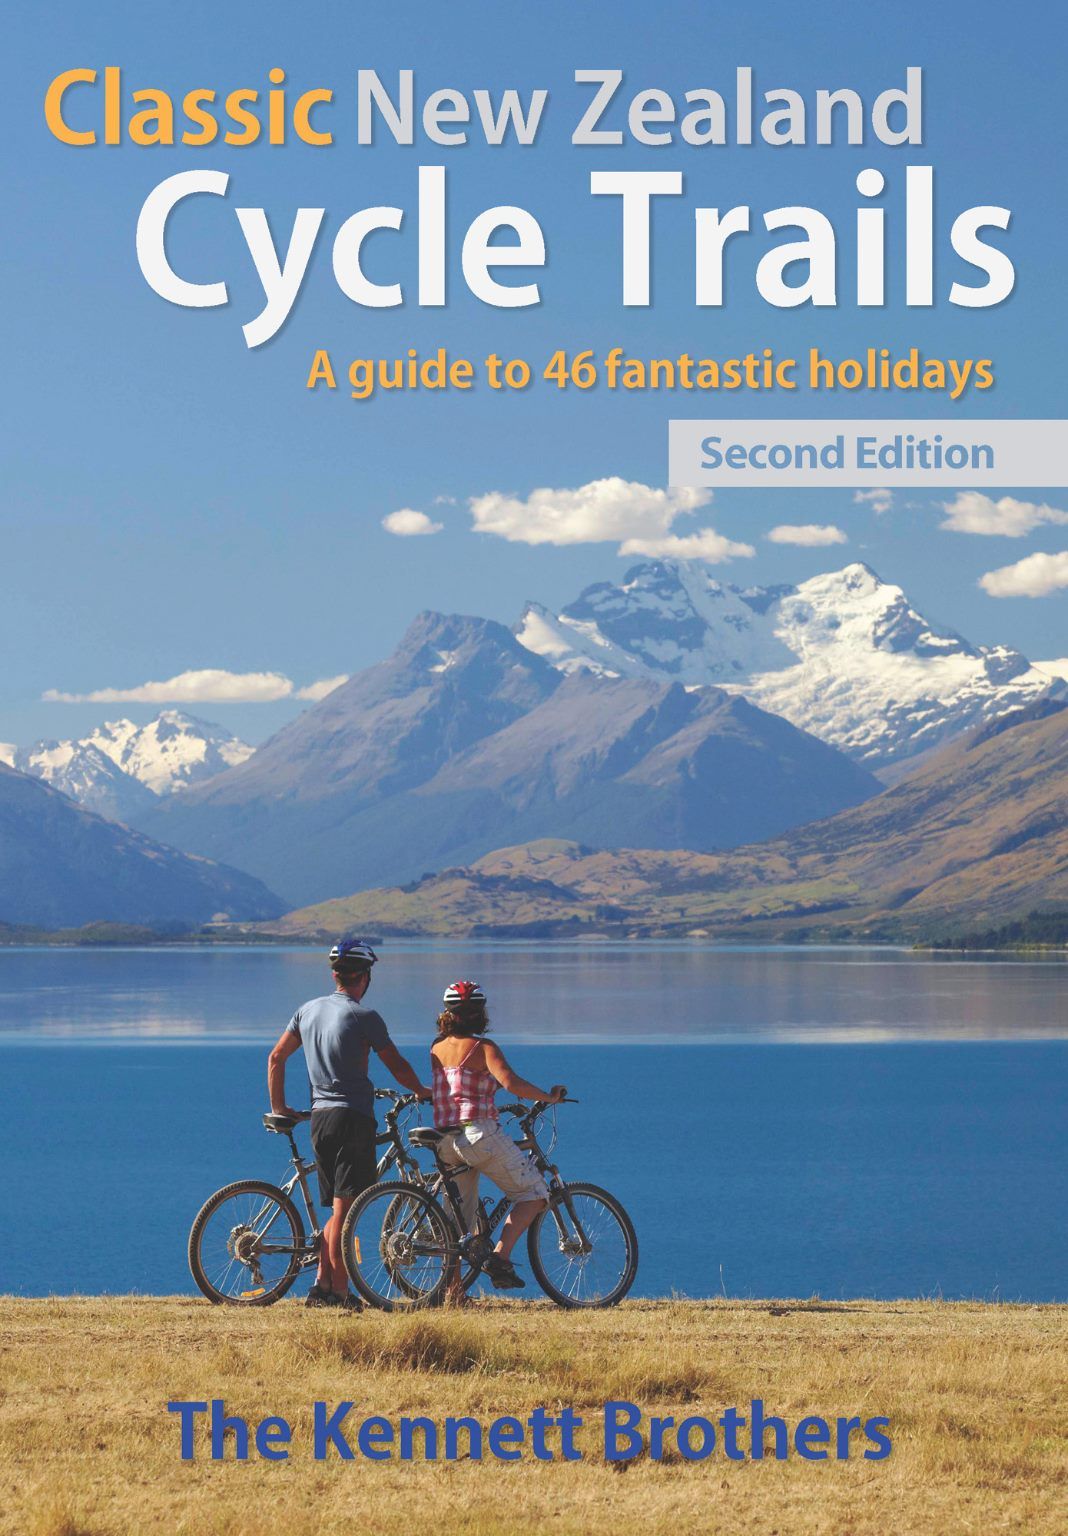 CLASSIC NEW ZEALAND CYCLE TRAILS